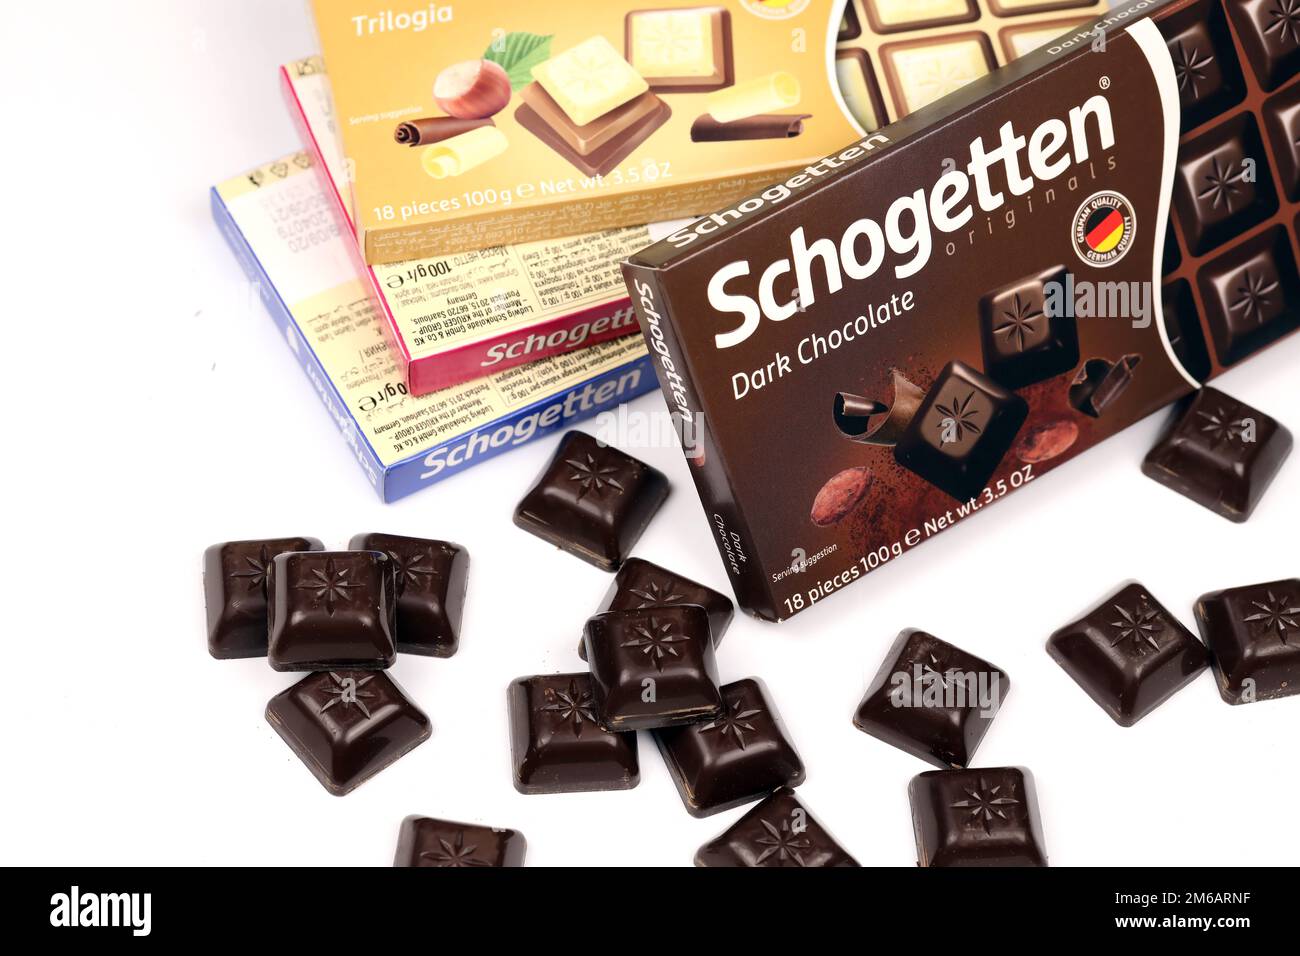 KYIV, UKRAINE - MAY goods - one Chocolate Schokolade 2022 Schogetten Stock 4, and successful Europes Co. most KG chocolate. produced suppliers GmbH by Ludwig of Alamy confectionery Photo